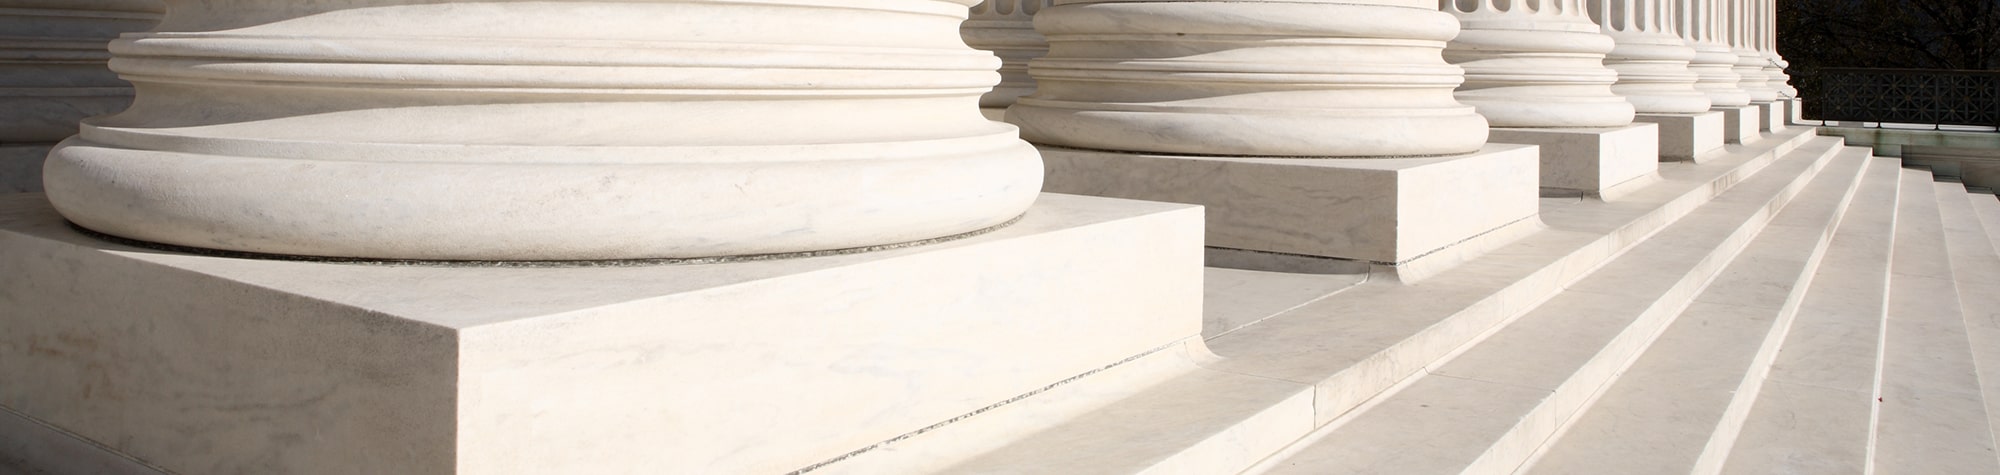 Marble pillars and steps at a government building